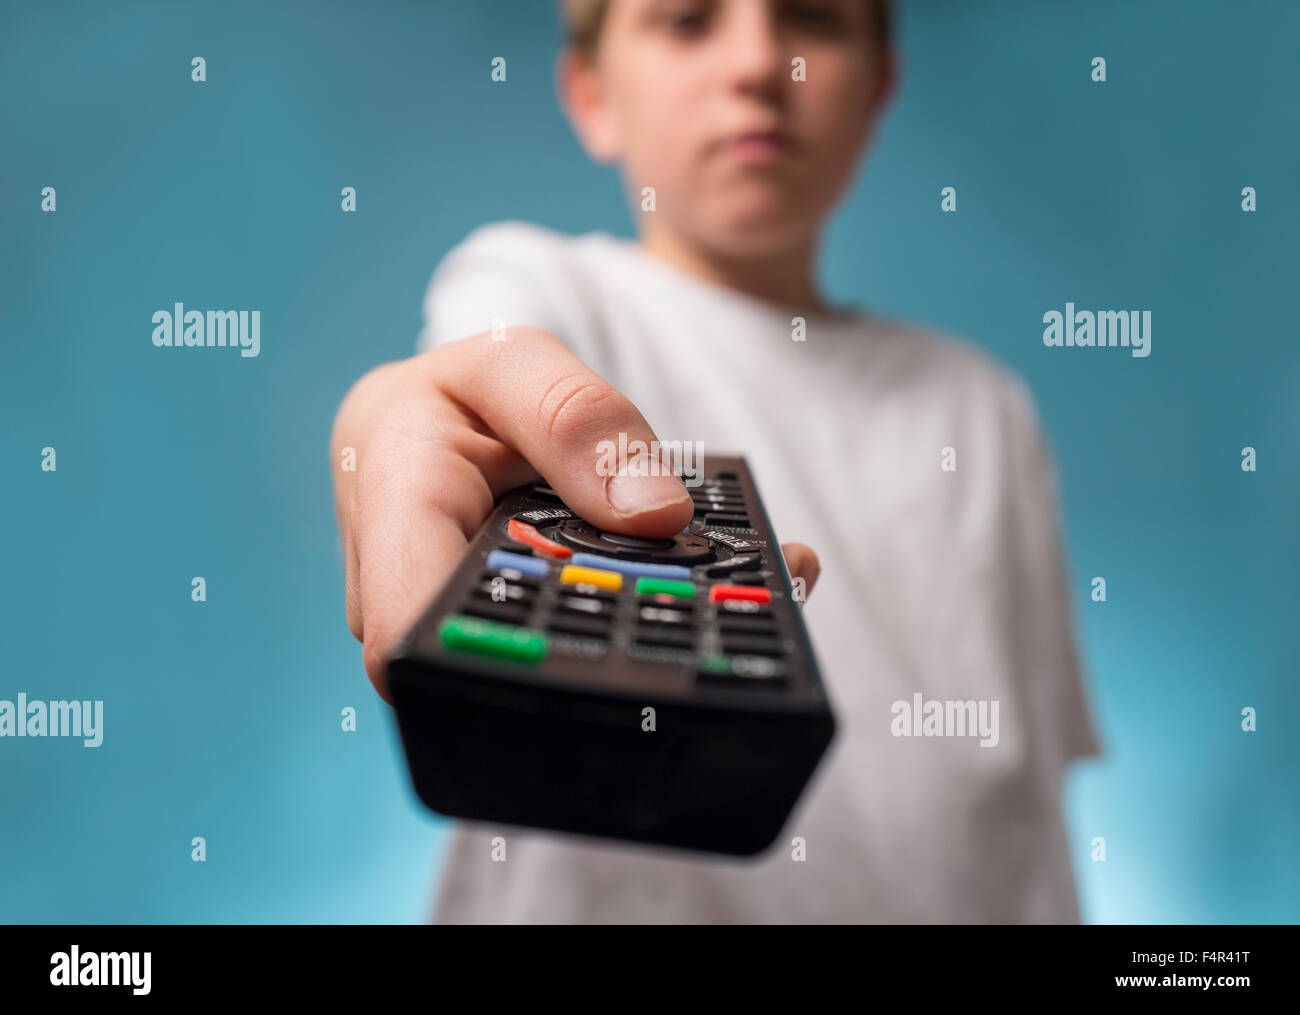 A bored boy changing channels using a TV remote control Stock Photo